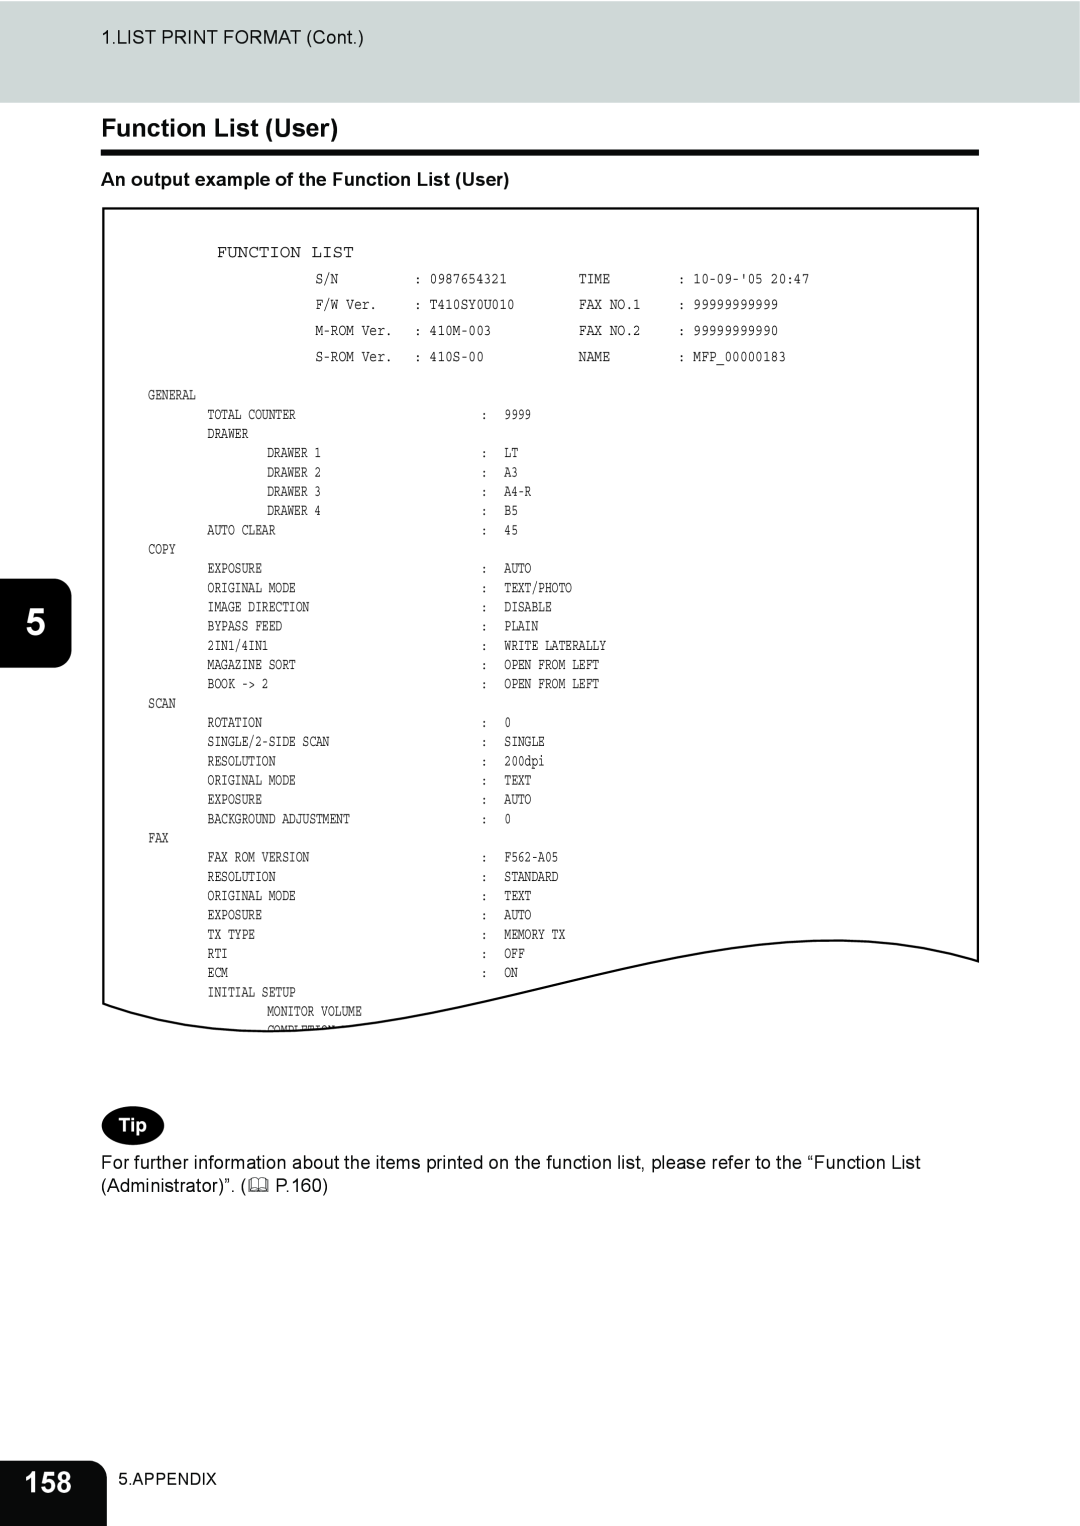 Toshiba 282, 232, 202L manual An output example of the Function List User 